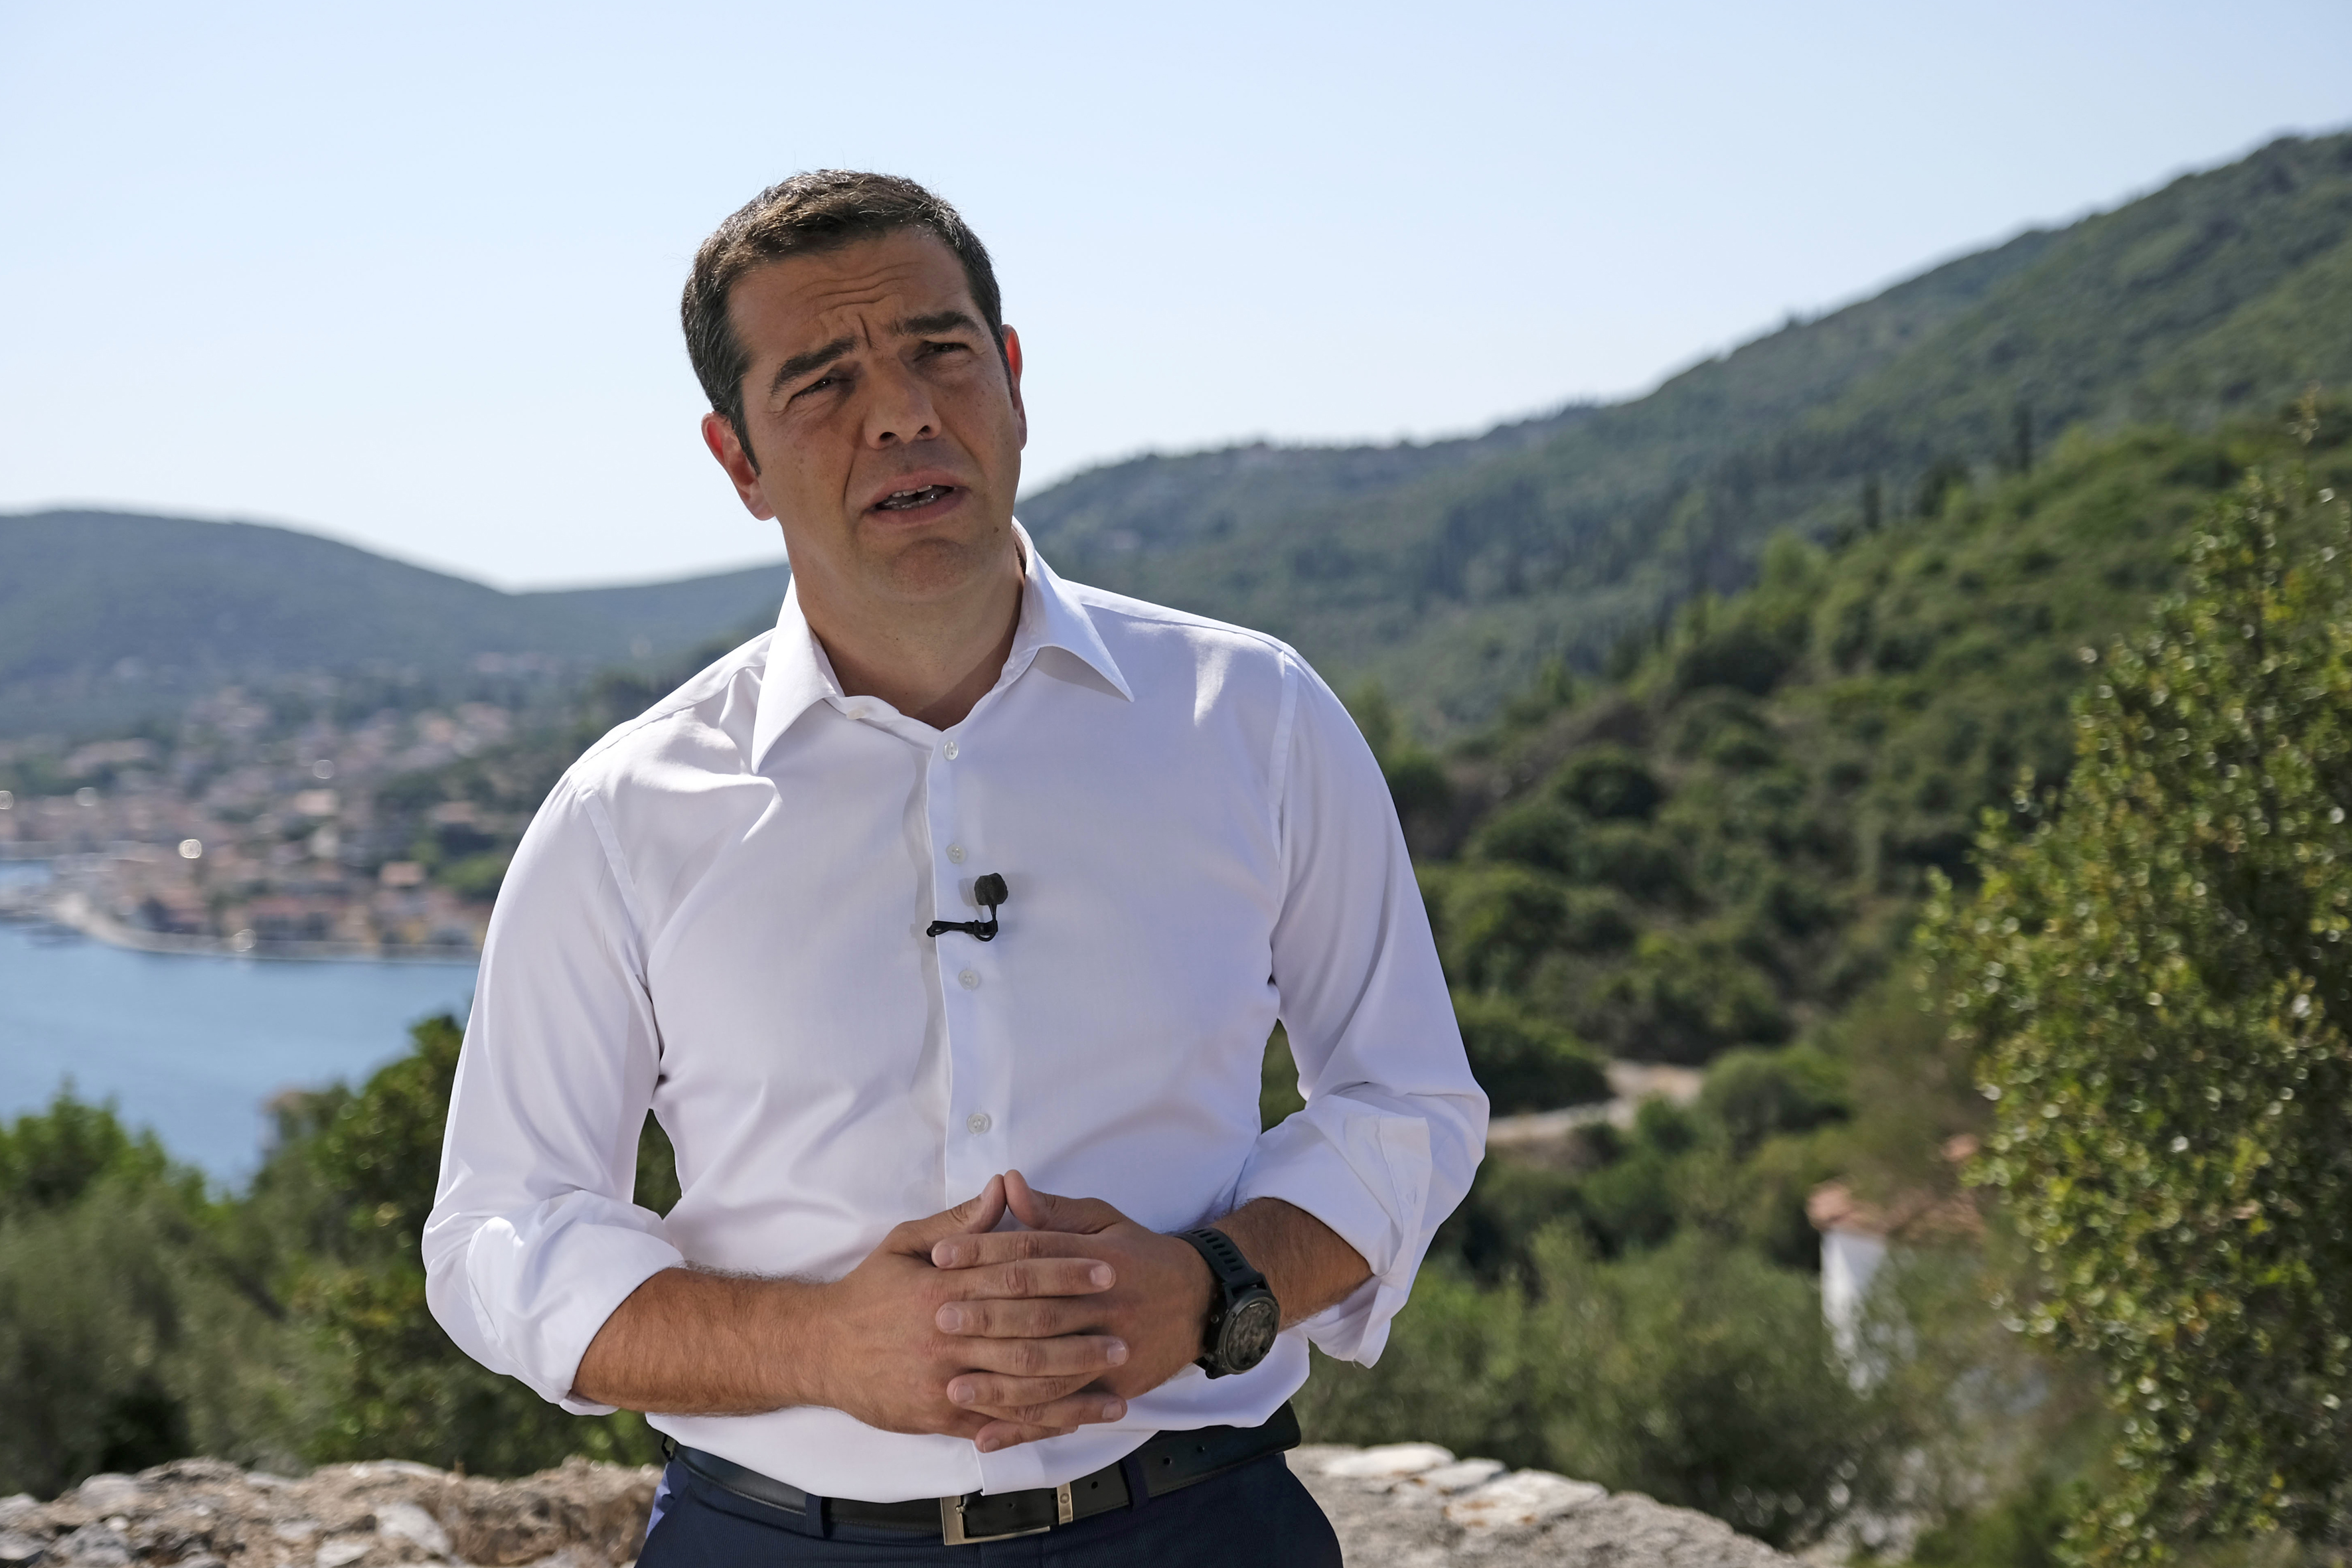 Tsipras heralds start of a new, post-bailout era in address from Ithaca